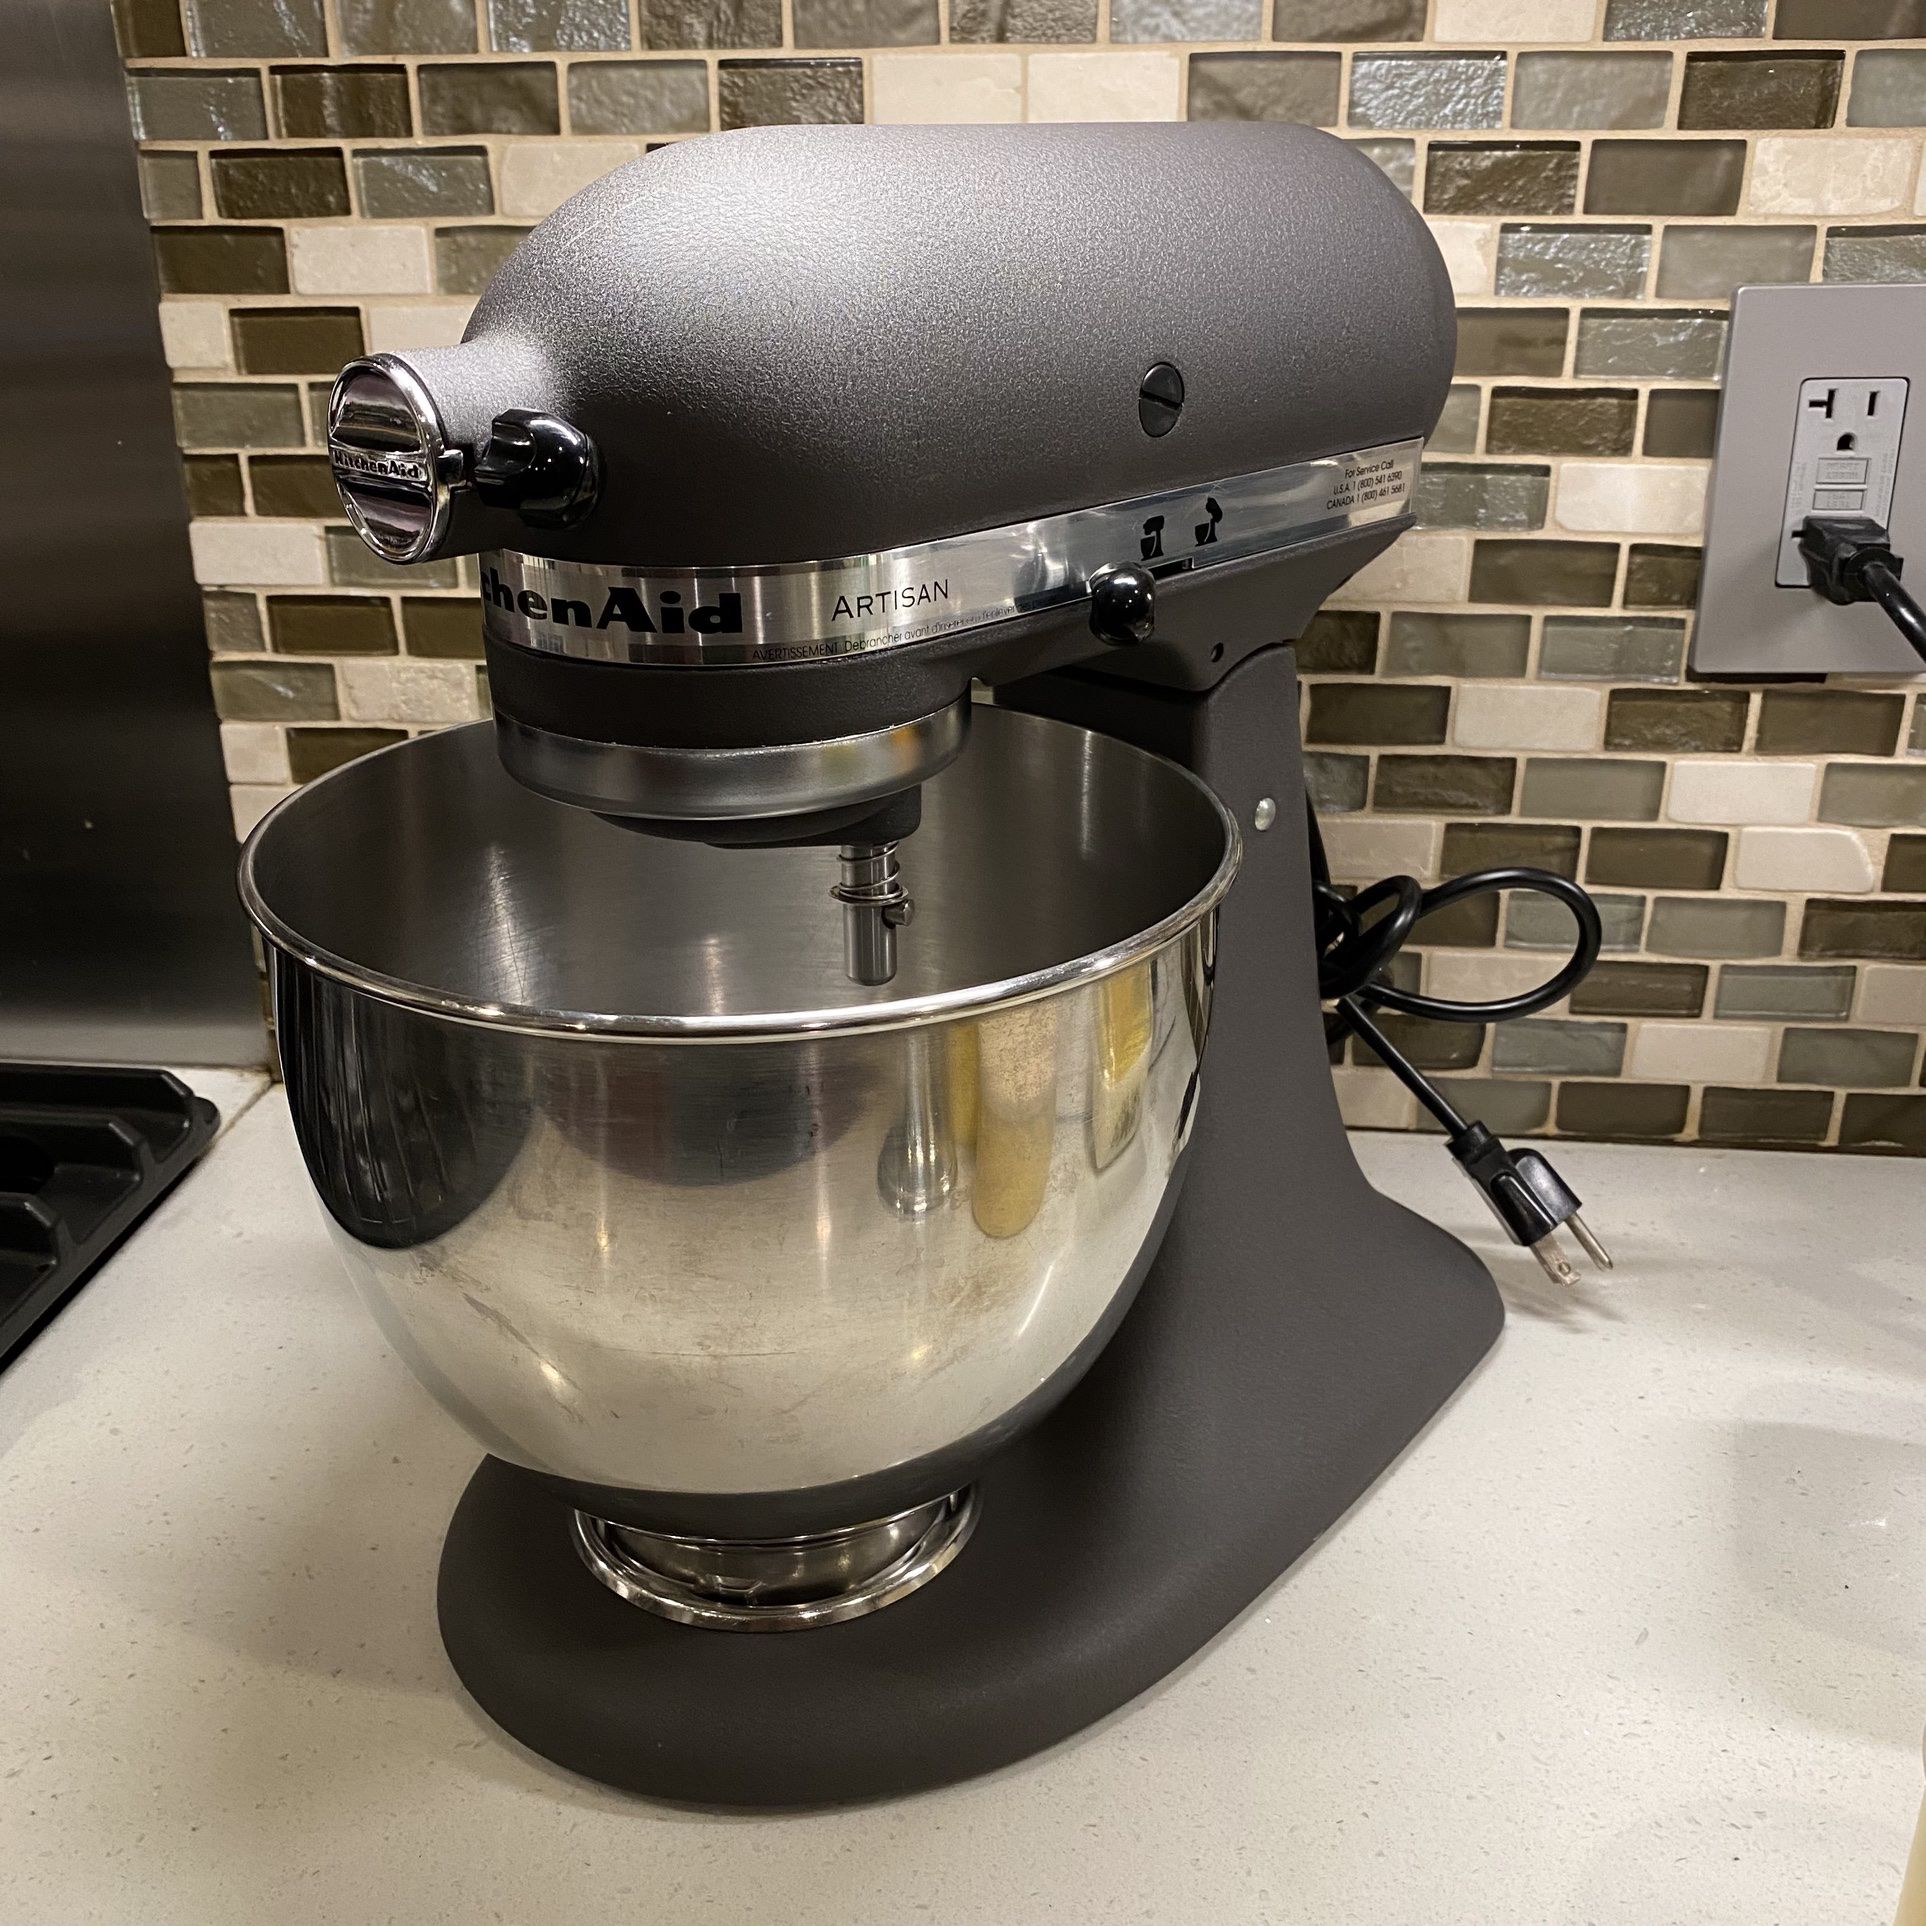 Kitchenaid Fruit/Vegetable Strainer for Sale in Tacoma, WA - OfferUp